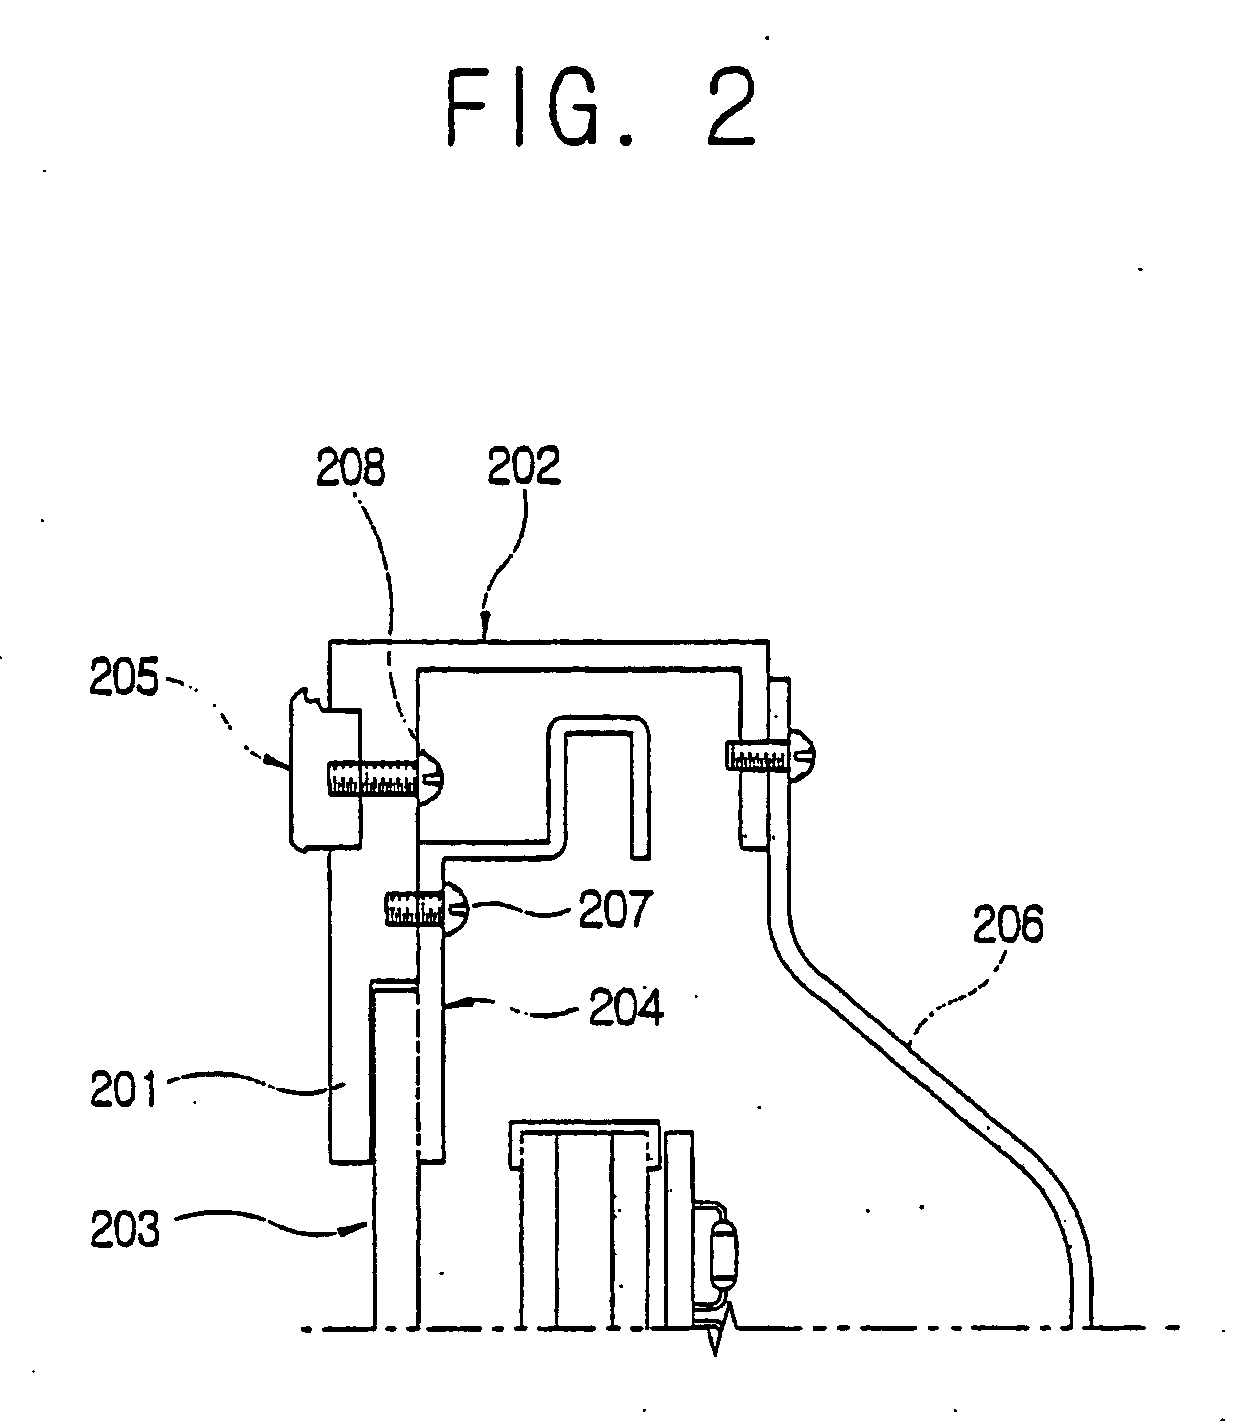 Display apparatus and method